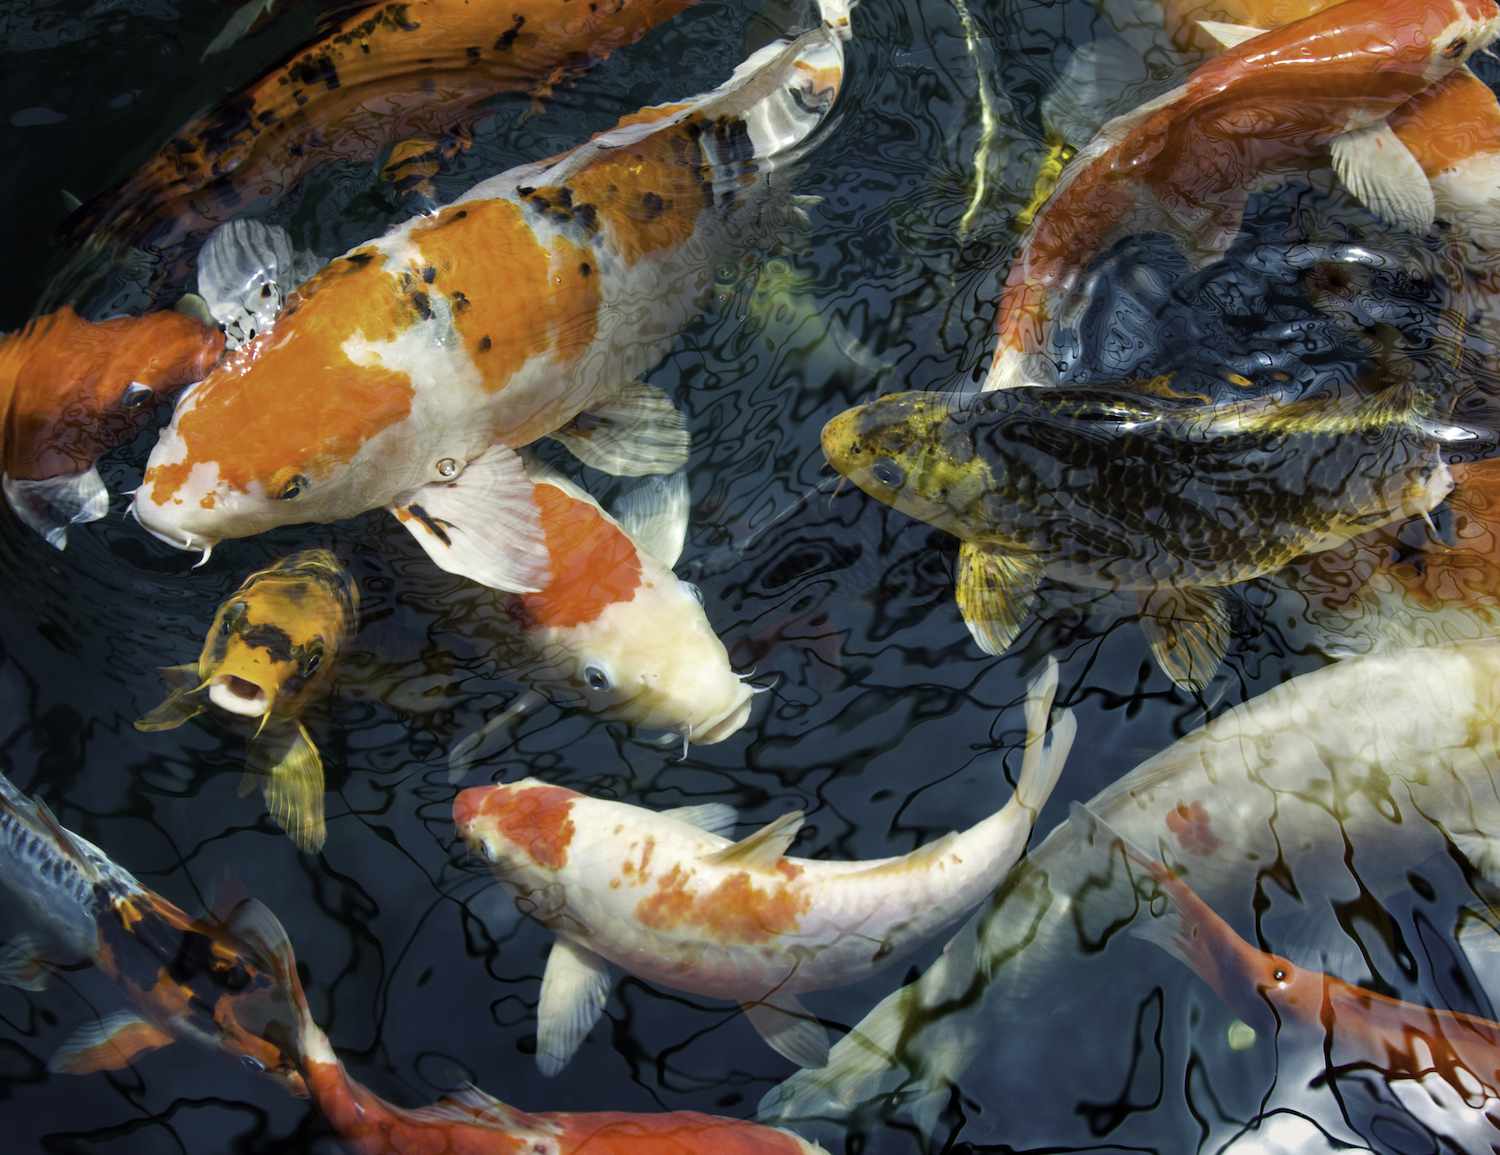 A group of colorful koi